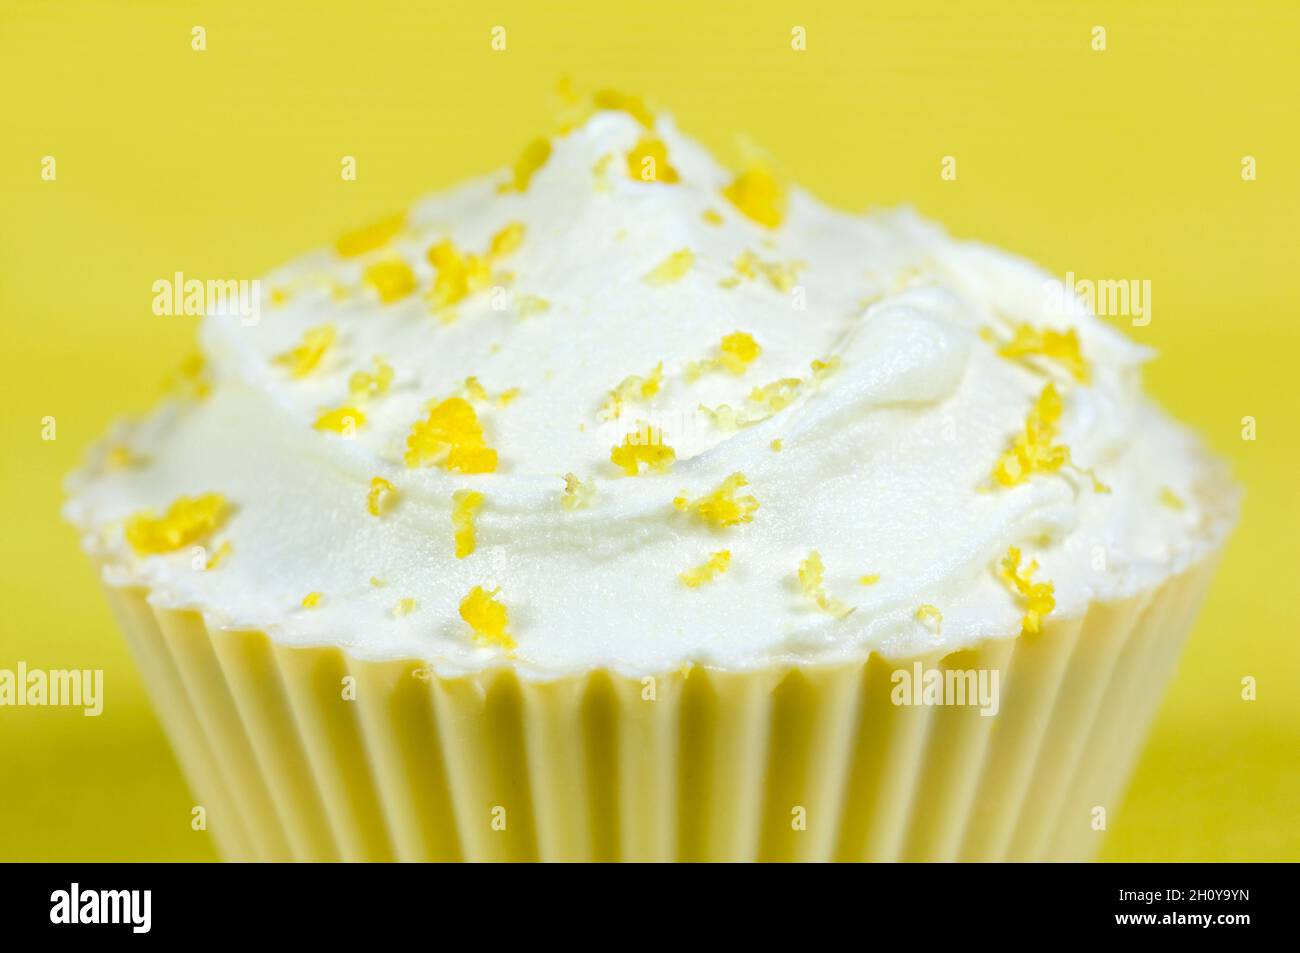 Lemon cupcake with lemon icing and sprinkled with grated lemon against a yellow background Stock Photo